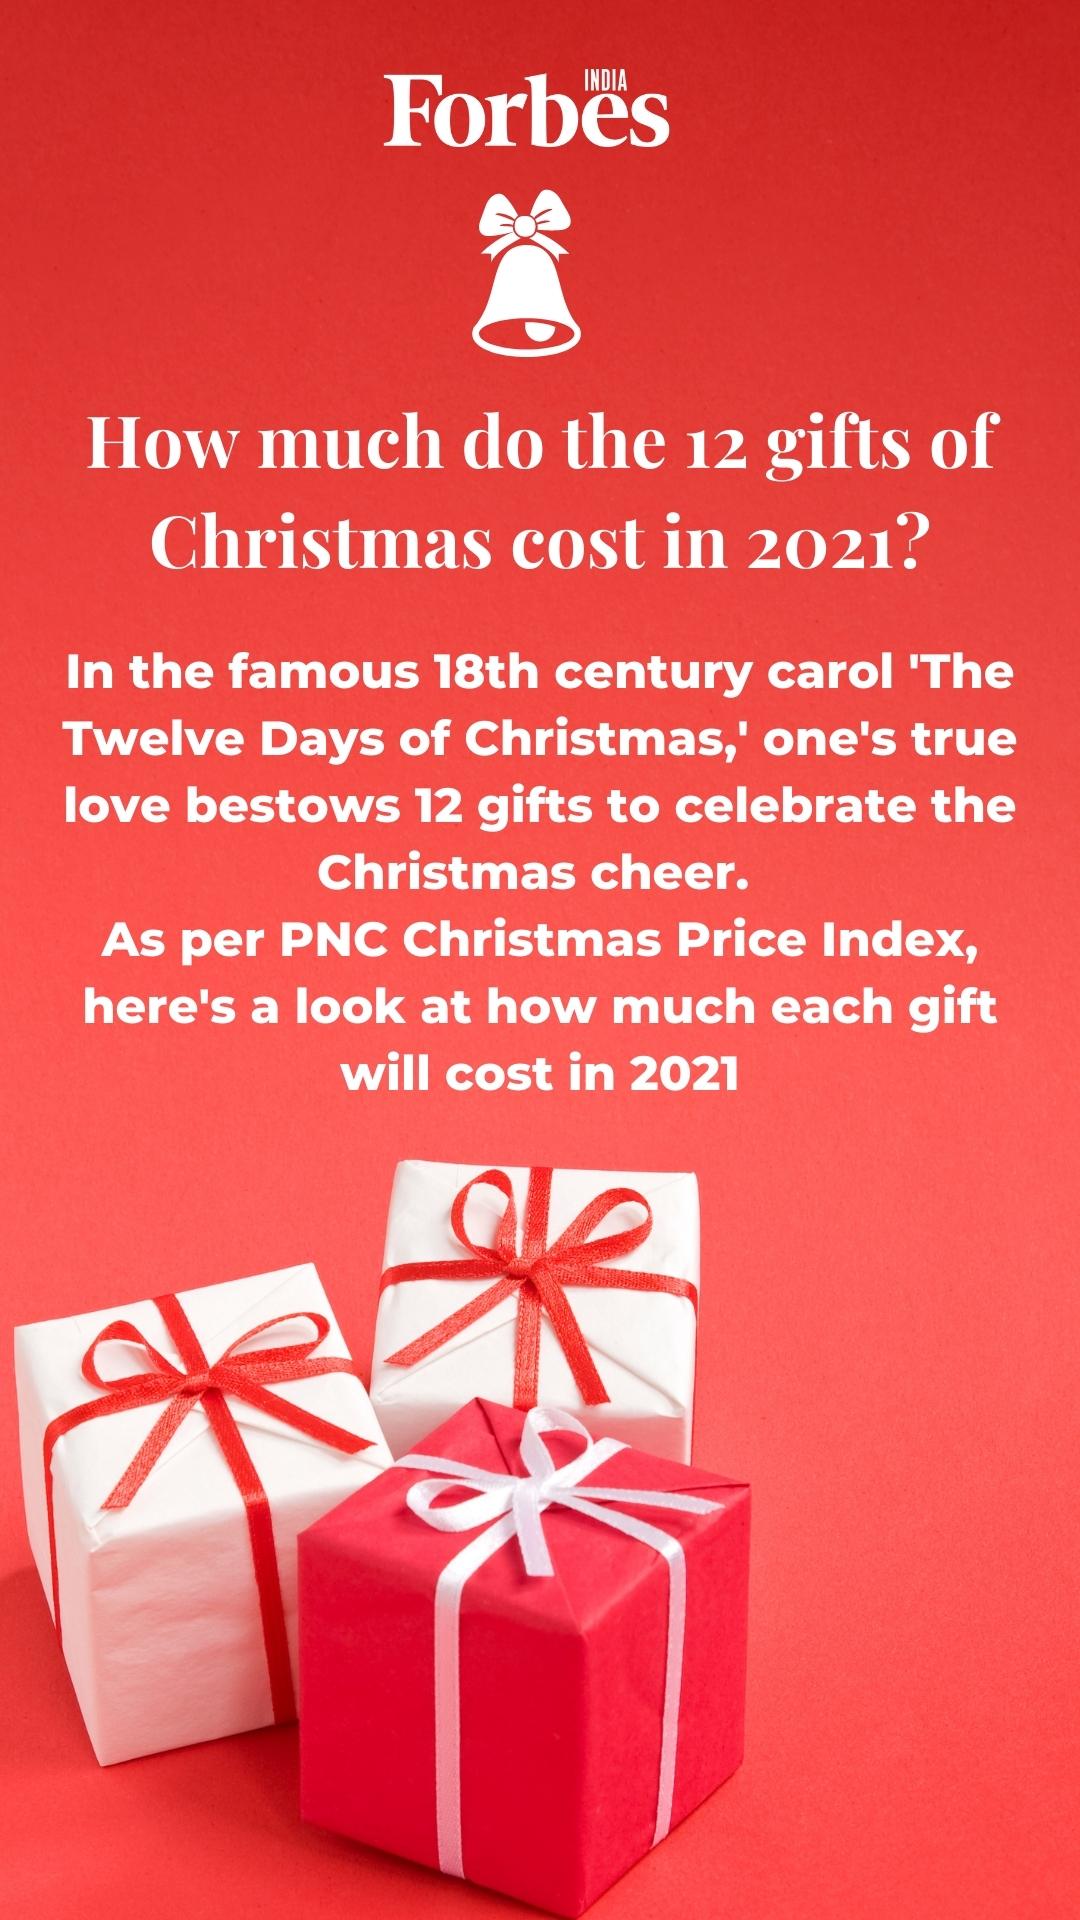 How much will it cost to buy gifts from 'The Twelve Days of Christmas'?